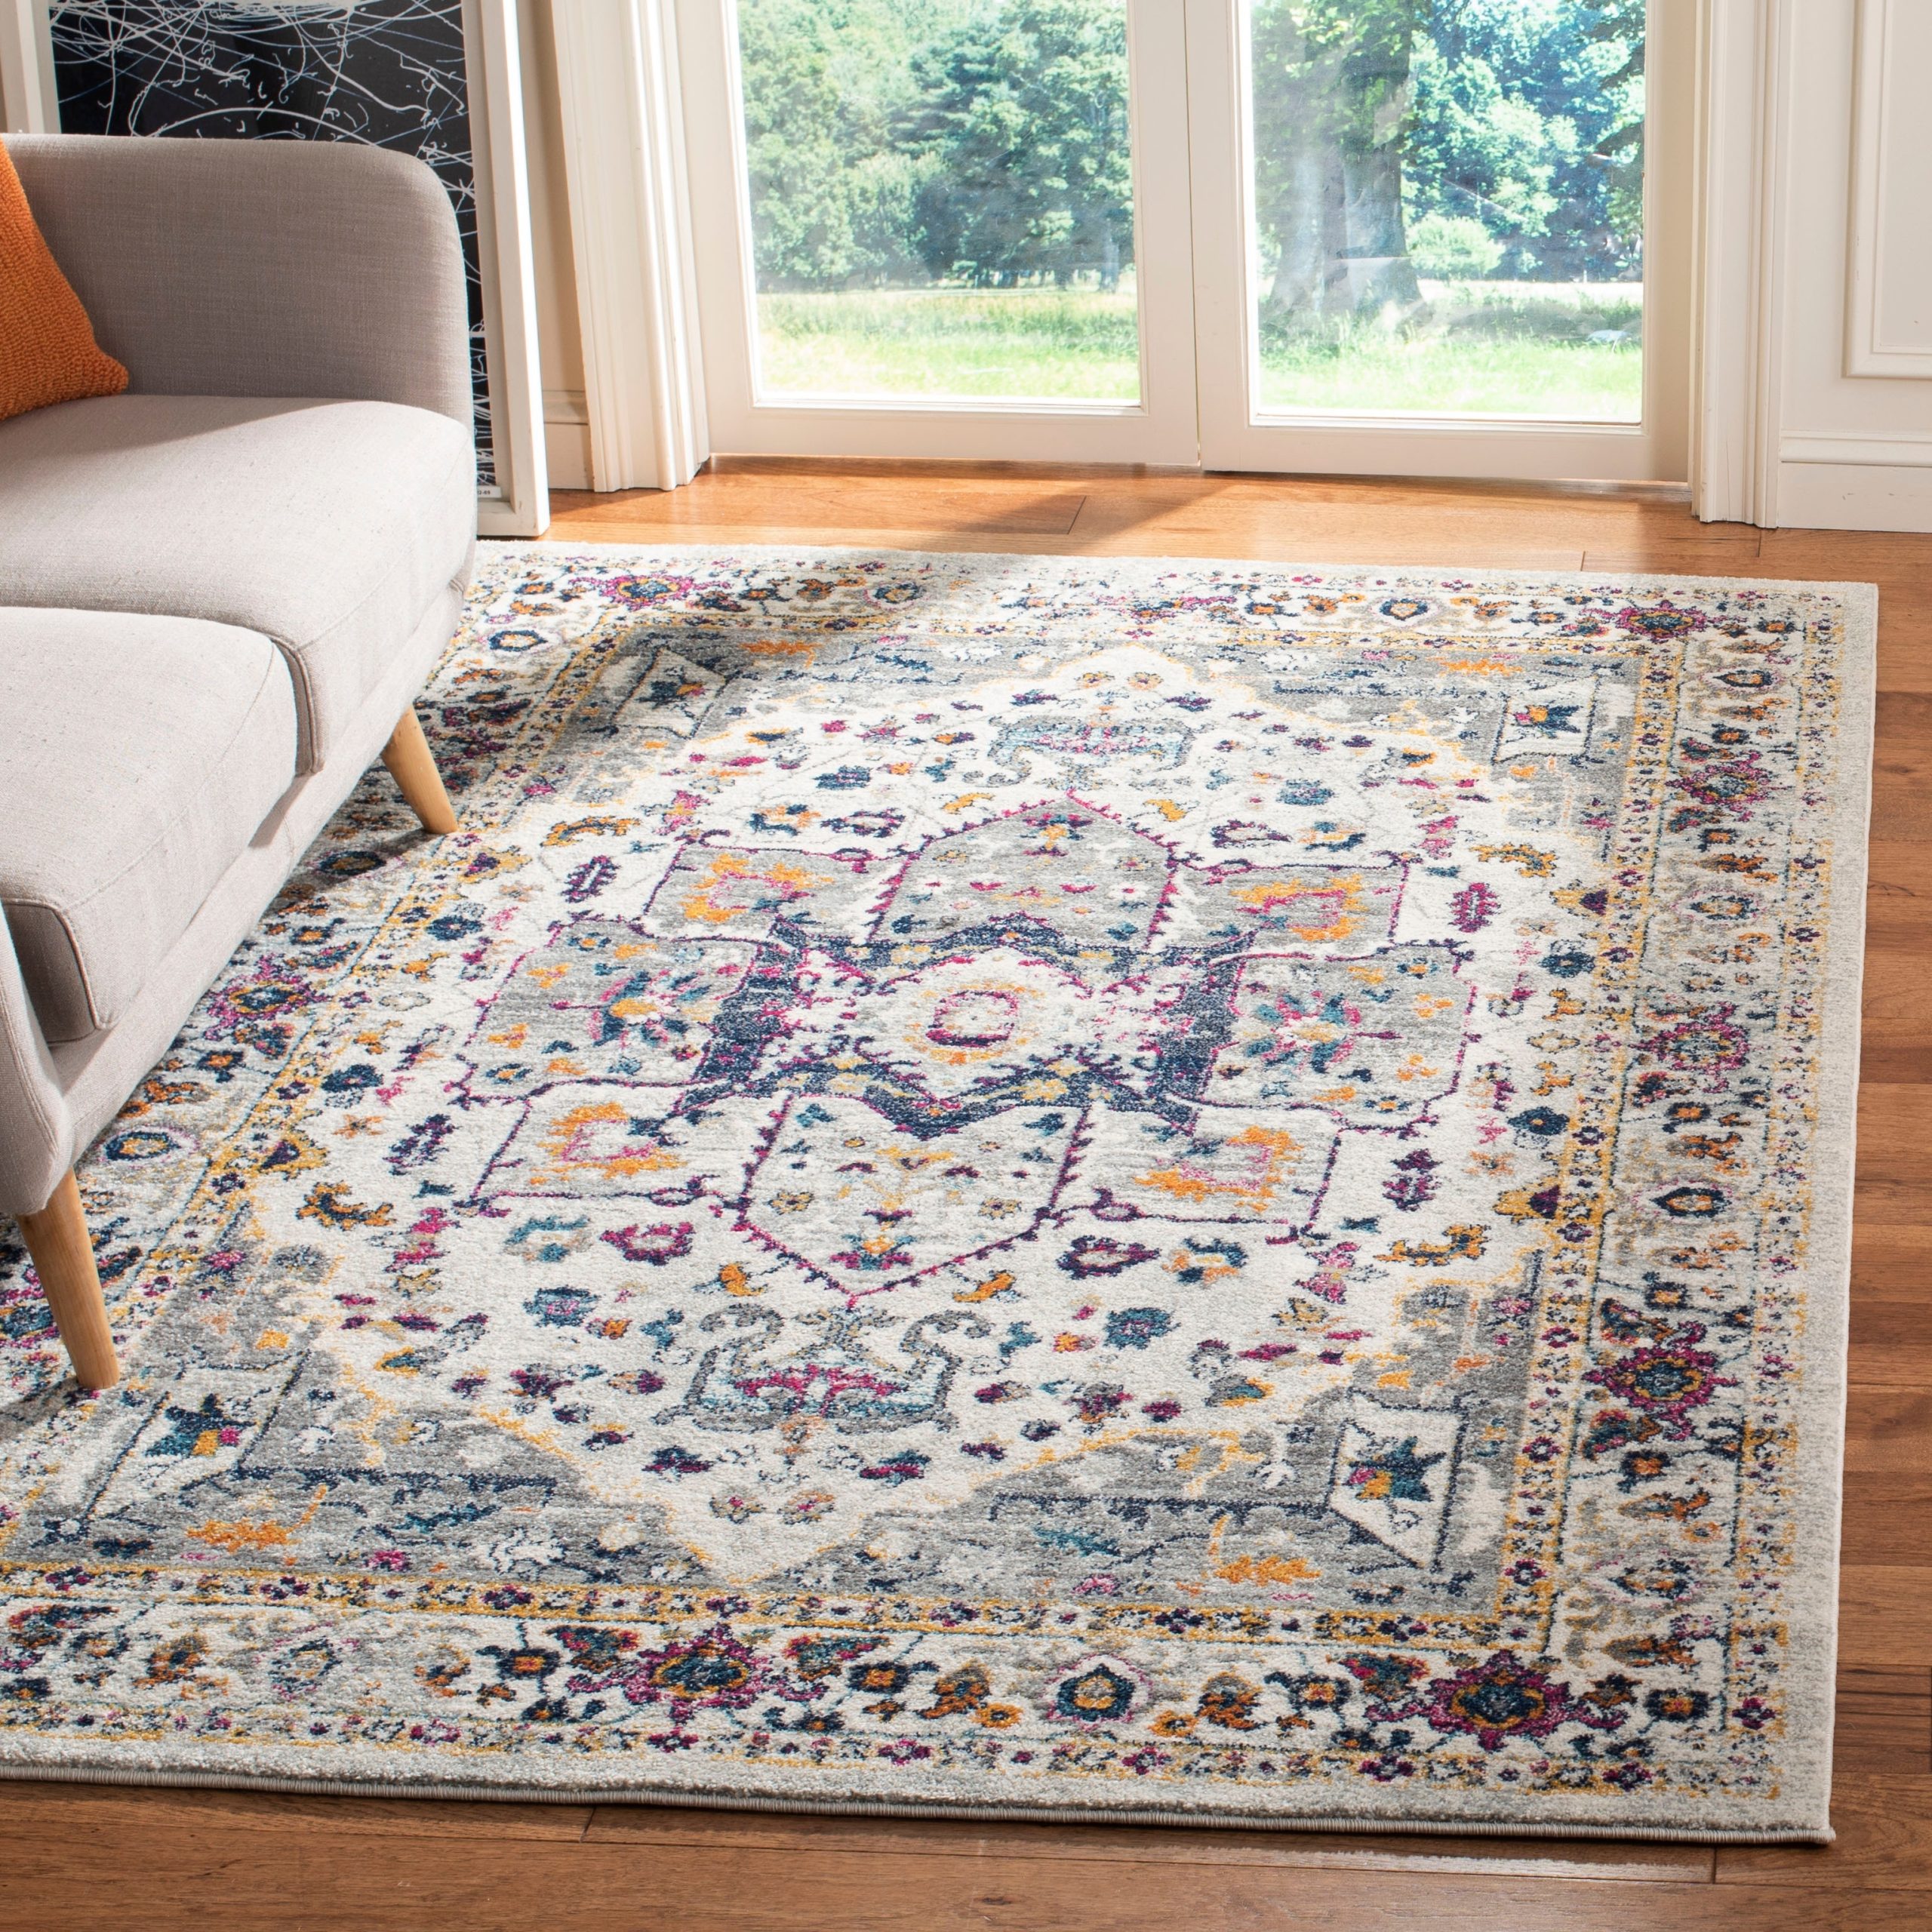 8 Best affordable vintage rugs for your home